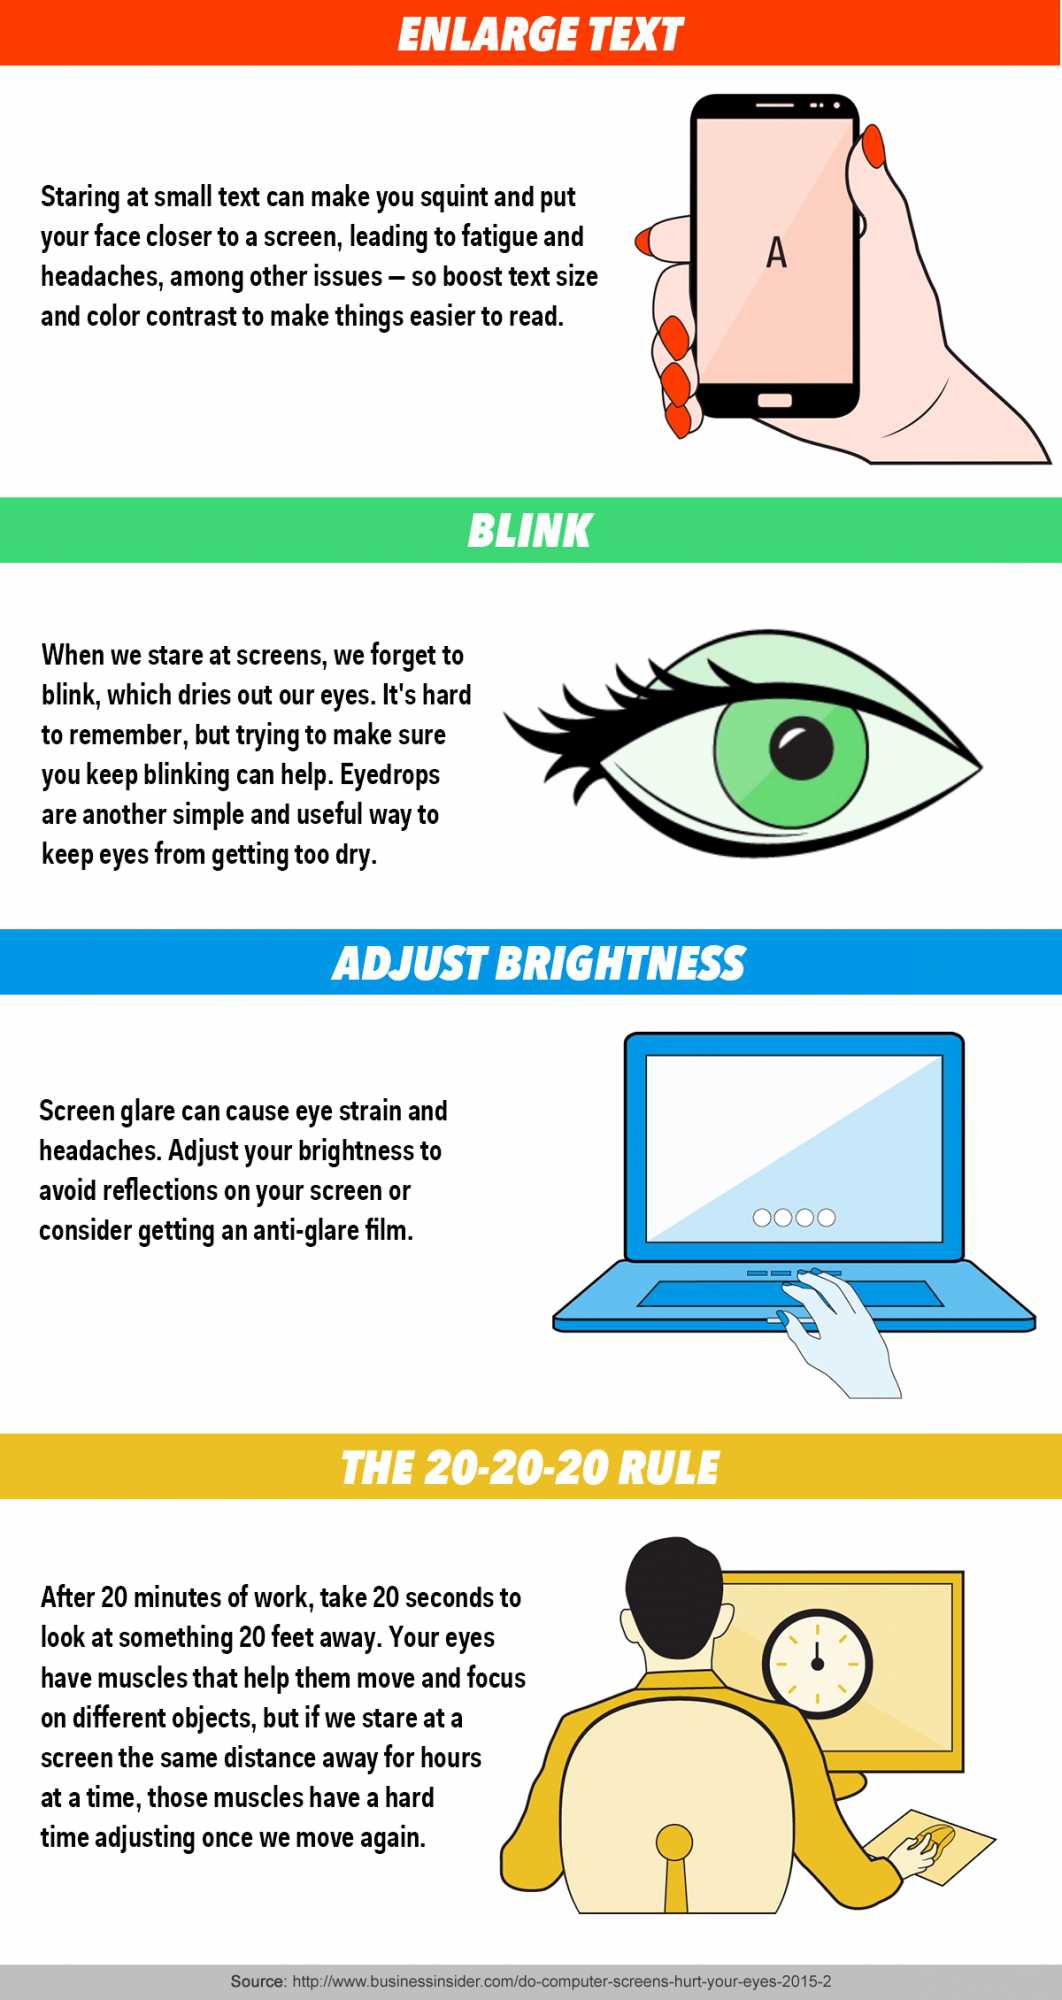 how-to-protect-your-eyes-if-you-stare-at-screens-all-day-read-more-httpwwwbusinessinsidercomdocomputerscreenshurtyoureyes20152ixzz3uikqw3ac-550913fda241d.jpg